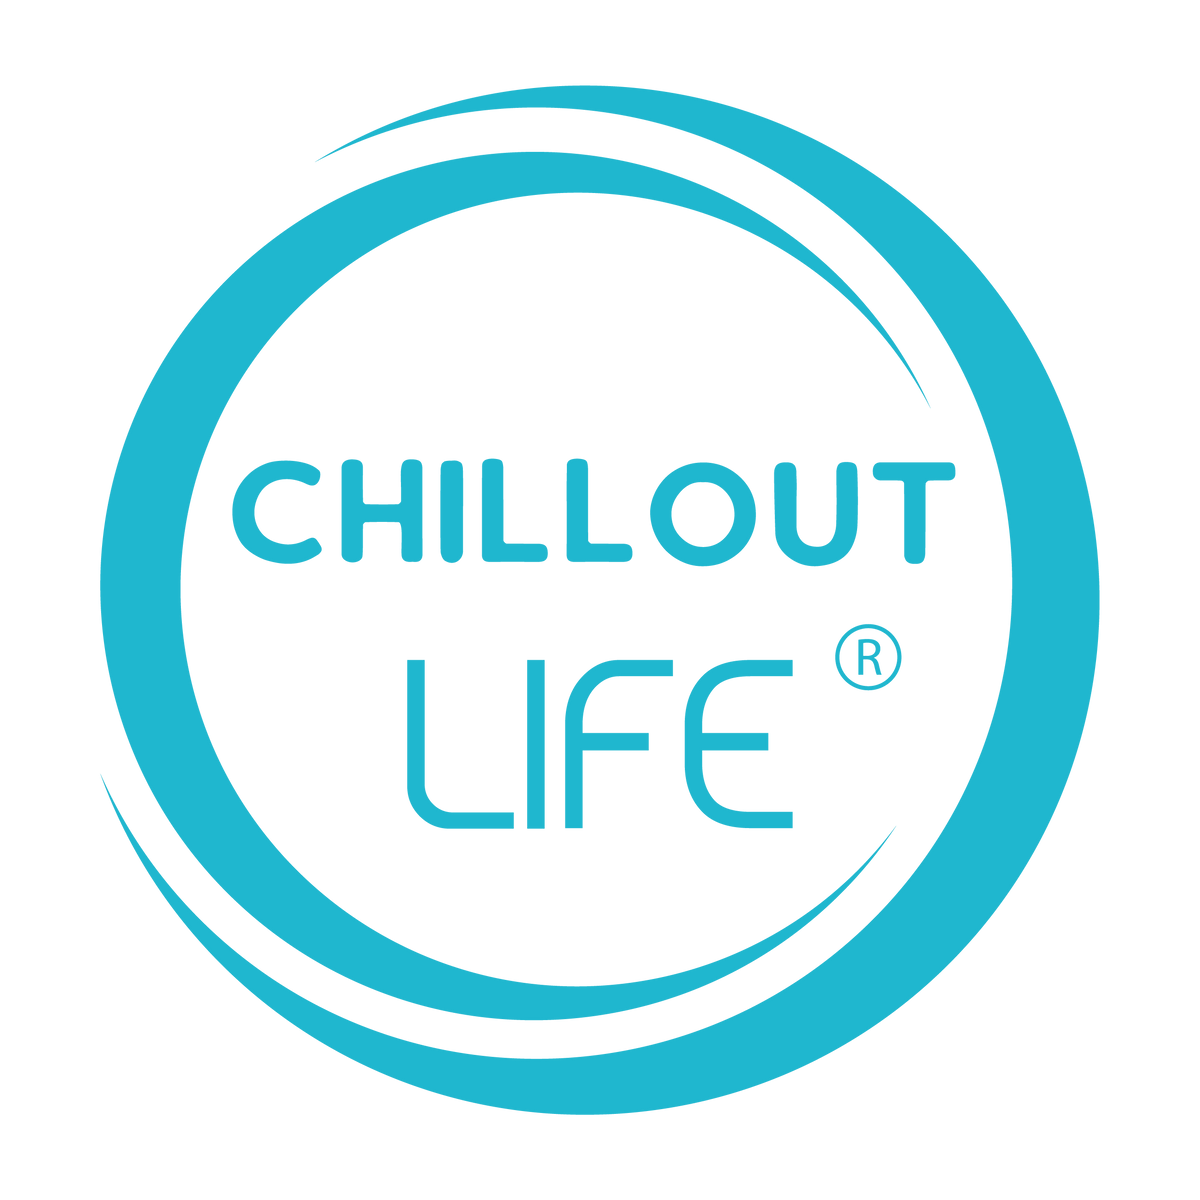 CHILLOUT LIFE Stainless Steel Insulated Coffee Mugs Set of 2 (14oz) –  Double Wall Coffee Cups with S…See more CHILLOUT LIFE Stainless Steel  Insulated